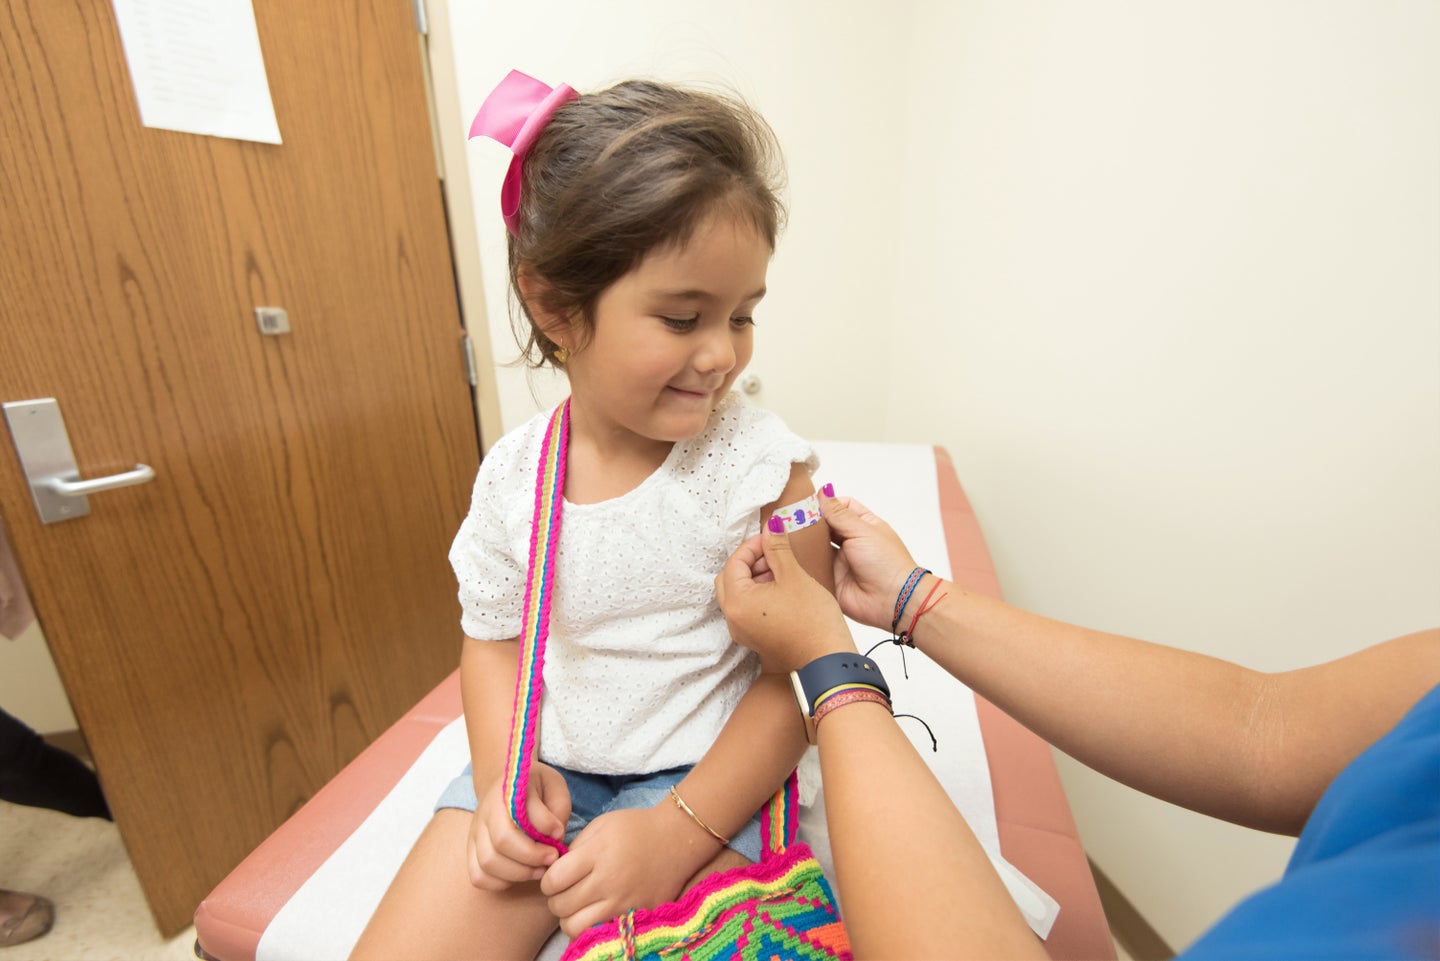 Pfizer's COVID-19 vaccine could be available for kids aged 5 to 11 as early as next week. 